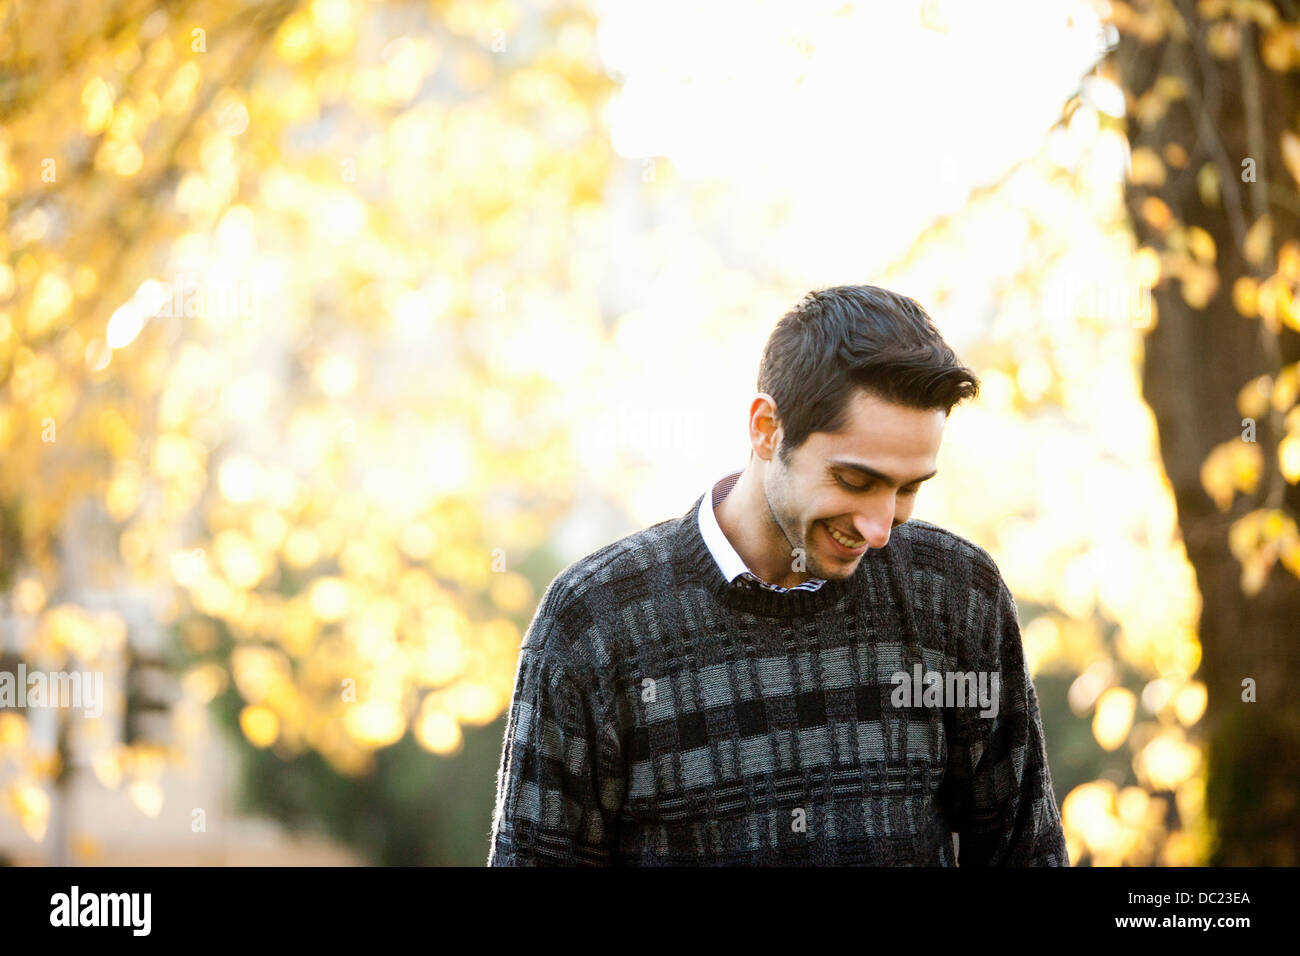 Young man looking down in sunlit park, smiling Stock Photo